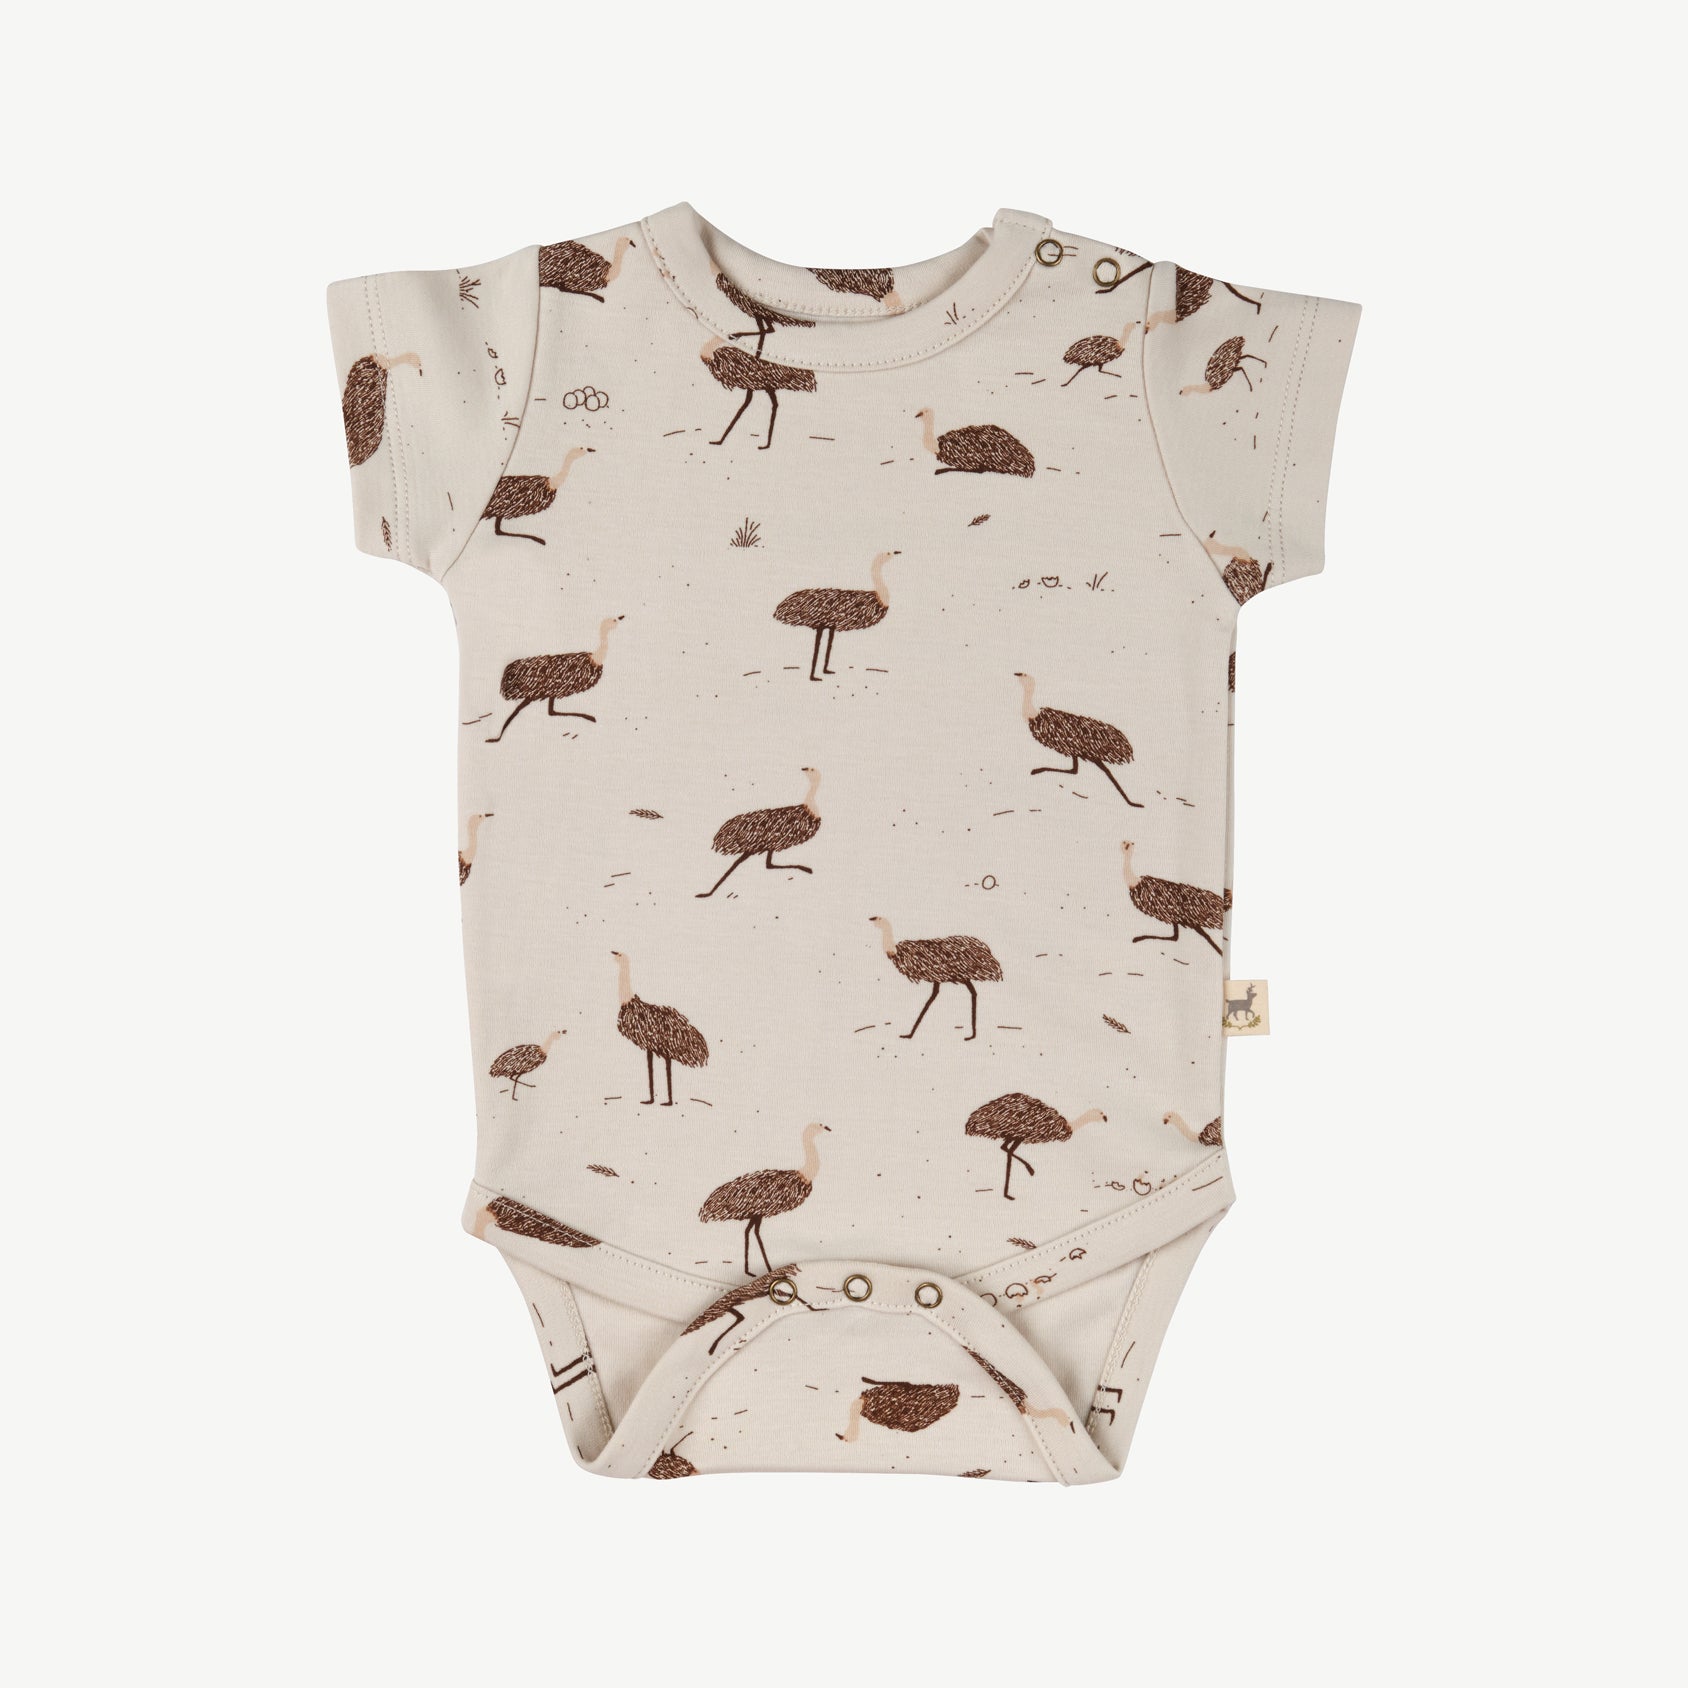 'emus everywhere' rainy day onesie + pants baby outfit